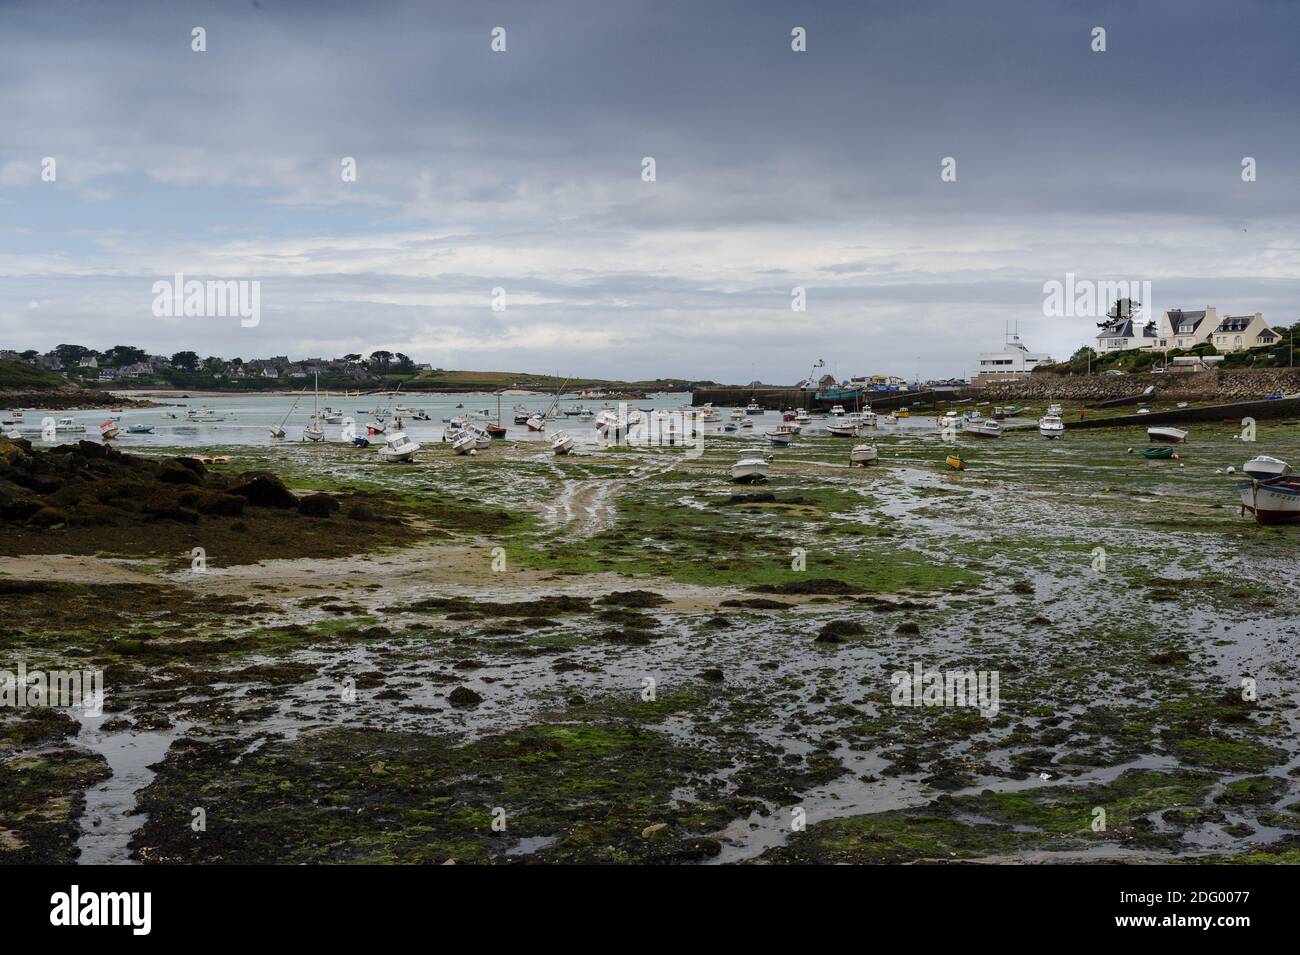 Roscoff grounding port at low tide. Brittany, France. Boats are moored near the shore. A few fisherman's houses line the main street. Clear weather, Stock Photo